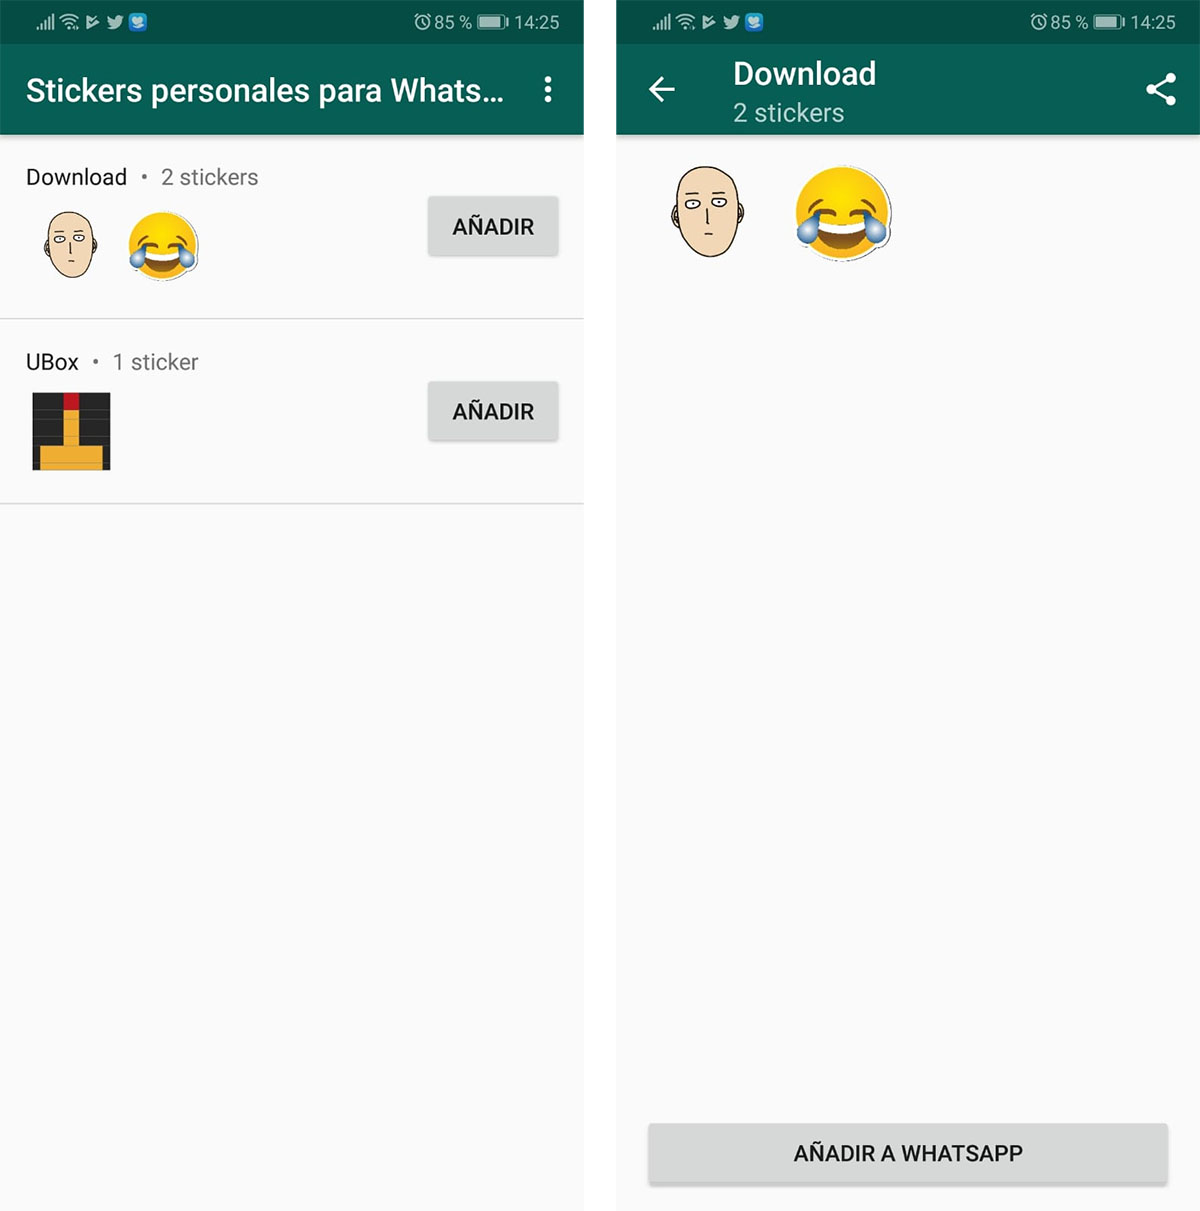 whatsapp stickers personales